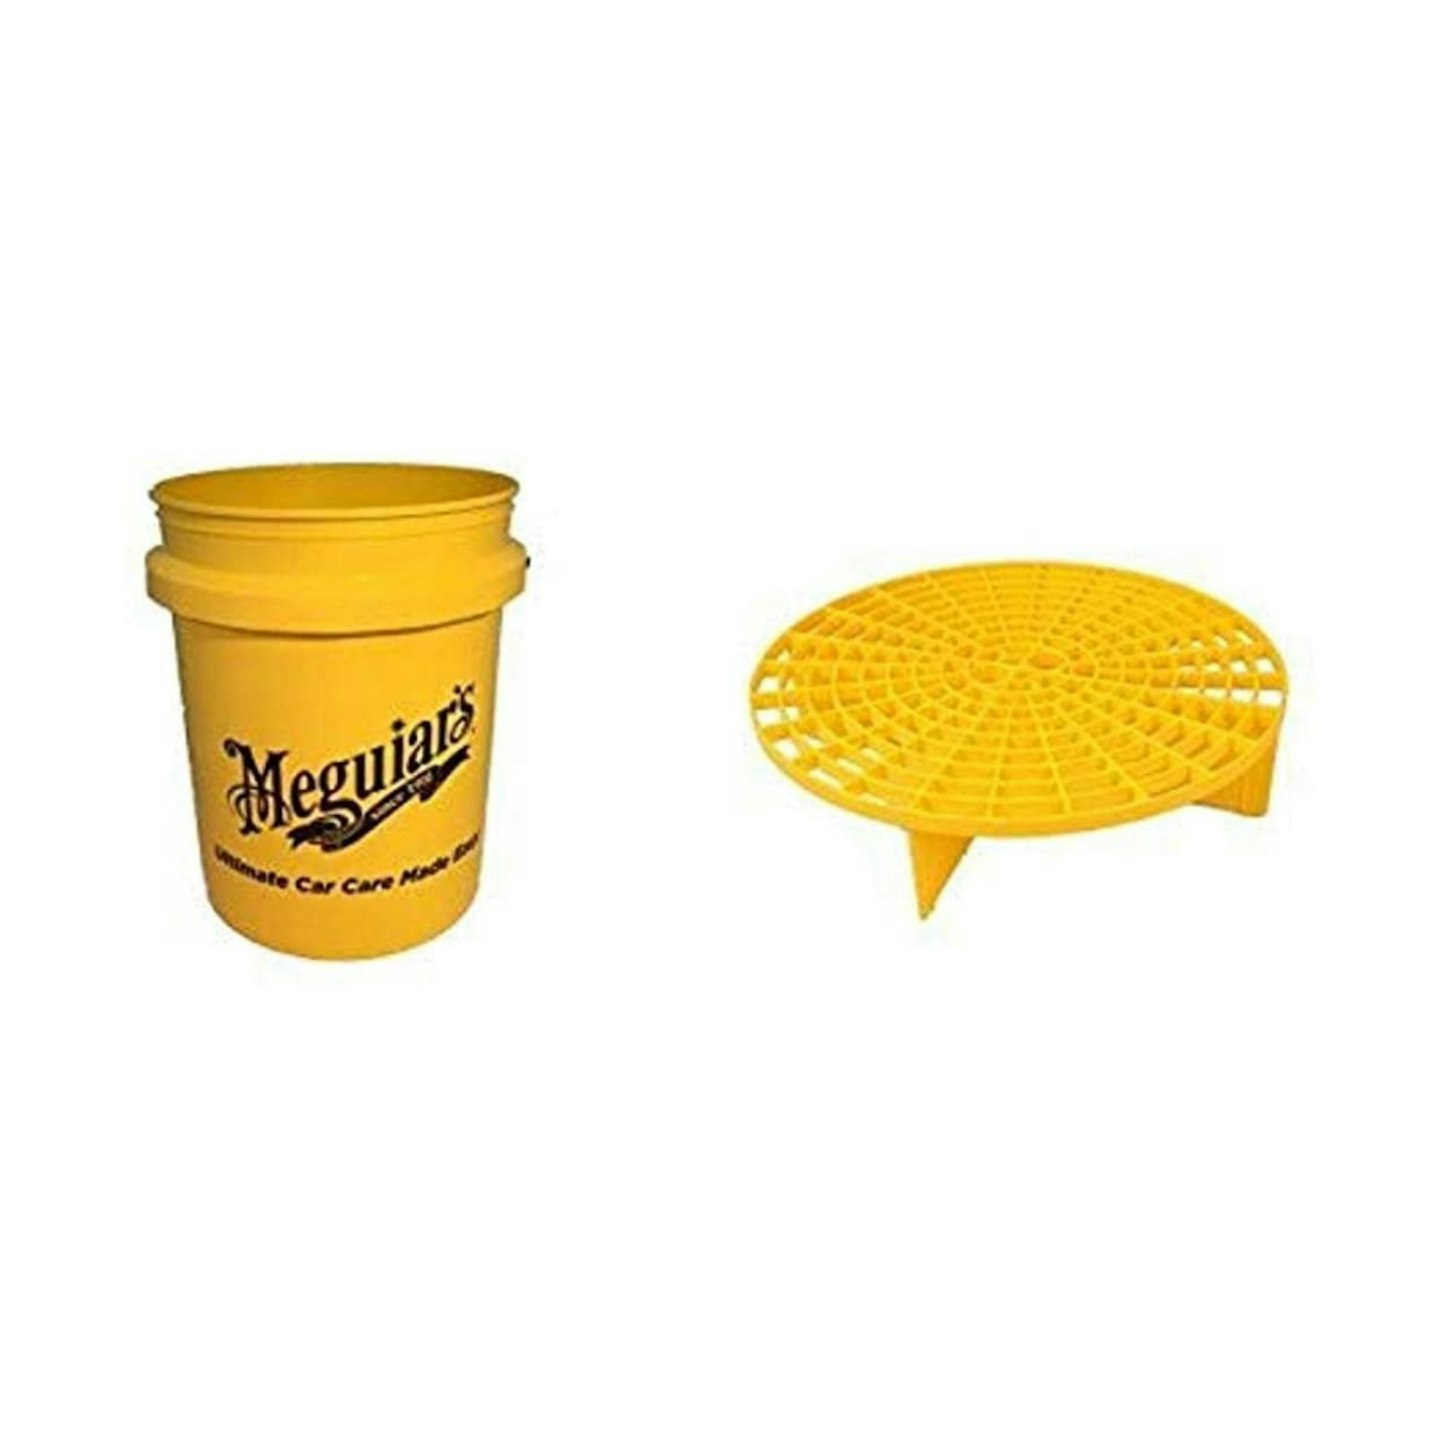 Meguiar's Yellow Large Car Wash Bucket and Professional Grit Guard